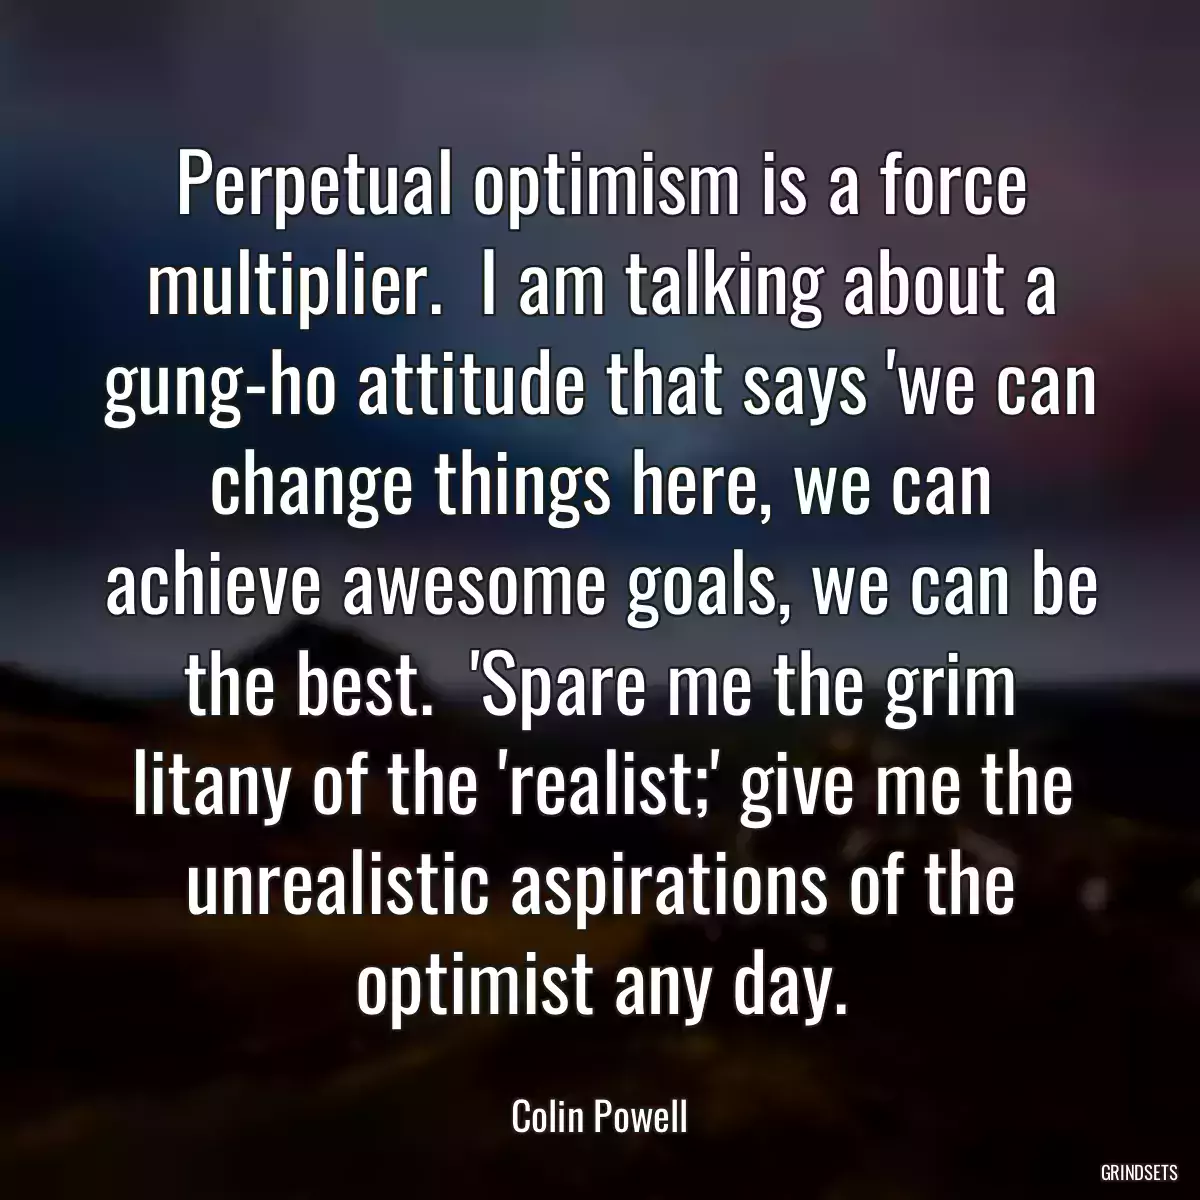 Perpetual optimism is a force multiplier.  I am talking about a gung-ho attitude that says \'we can change things here, we can achieve awesome goals, we can be the best.  \'Spare me the grim litany of the \'realist;\' give me the unrealistic aspirations of the optimist any day.